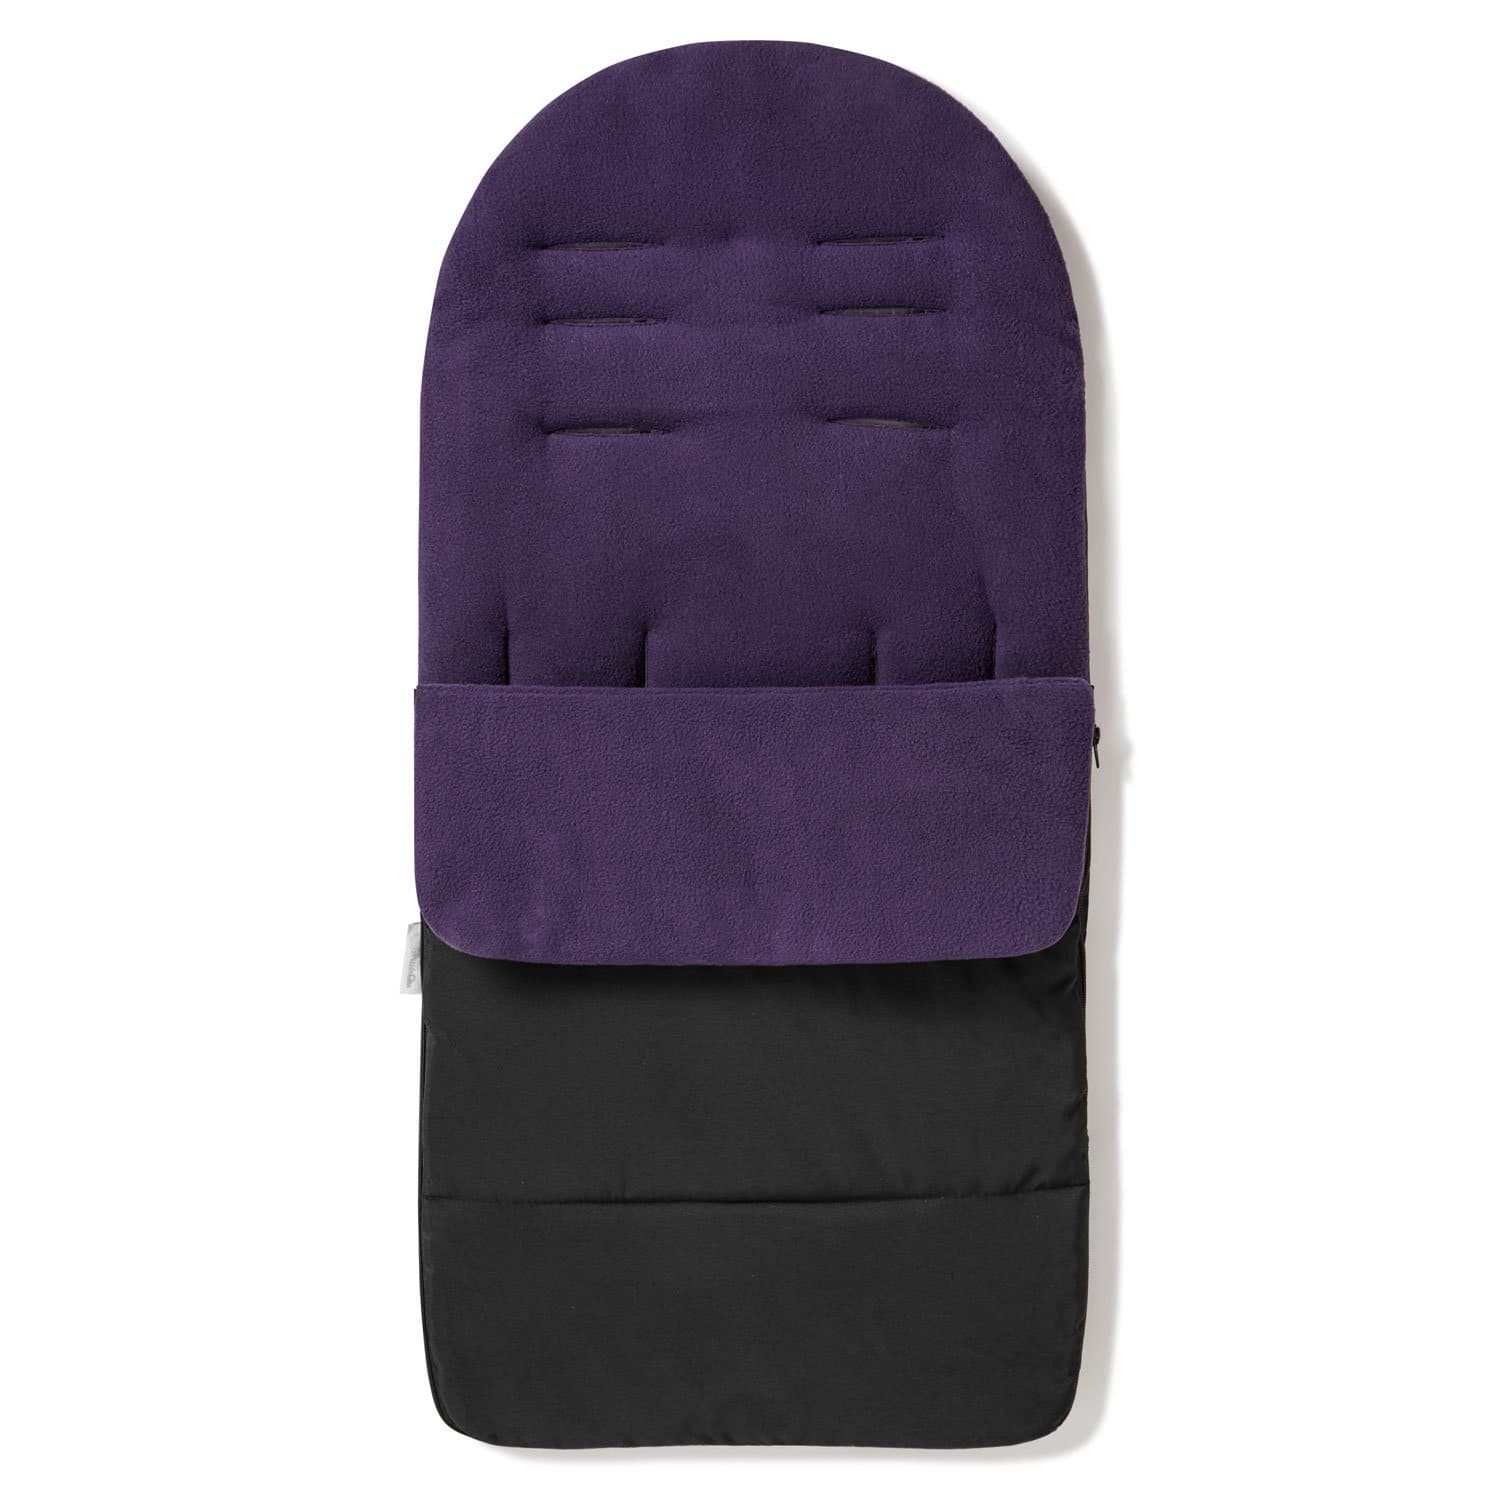 Premium Footmuff / Cosy Toes Compatible with Safety 1st - Plum Purple / Fits All Models | For Your Little One